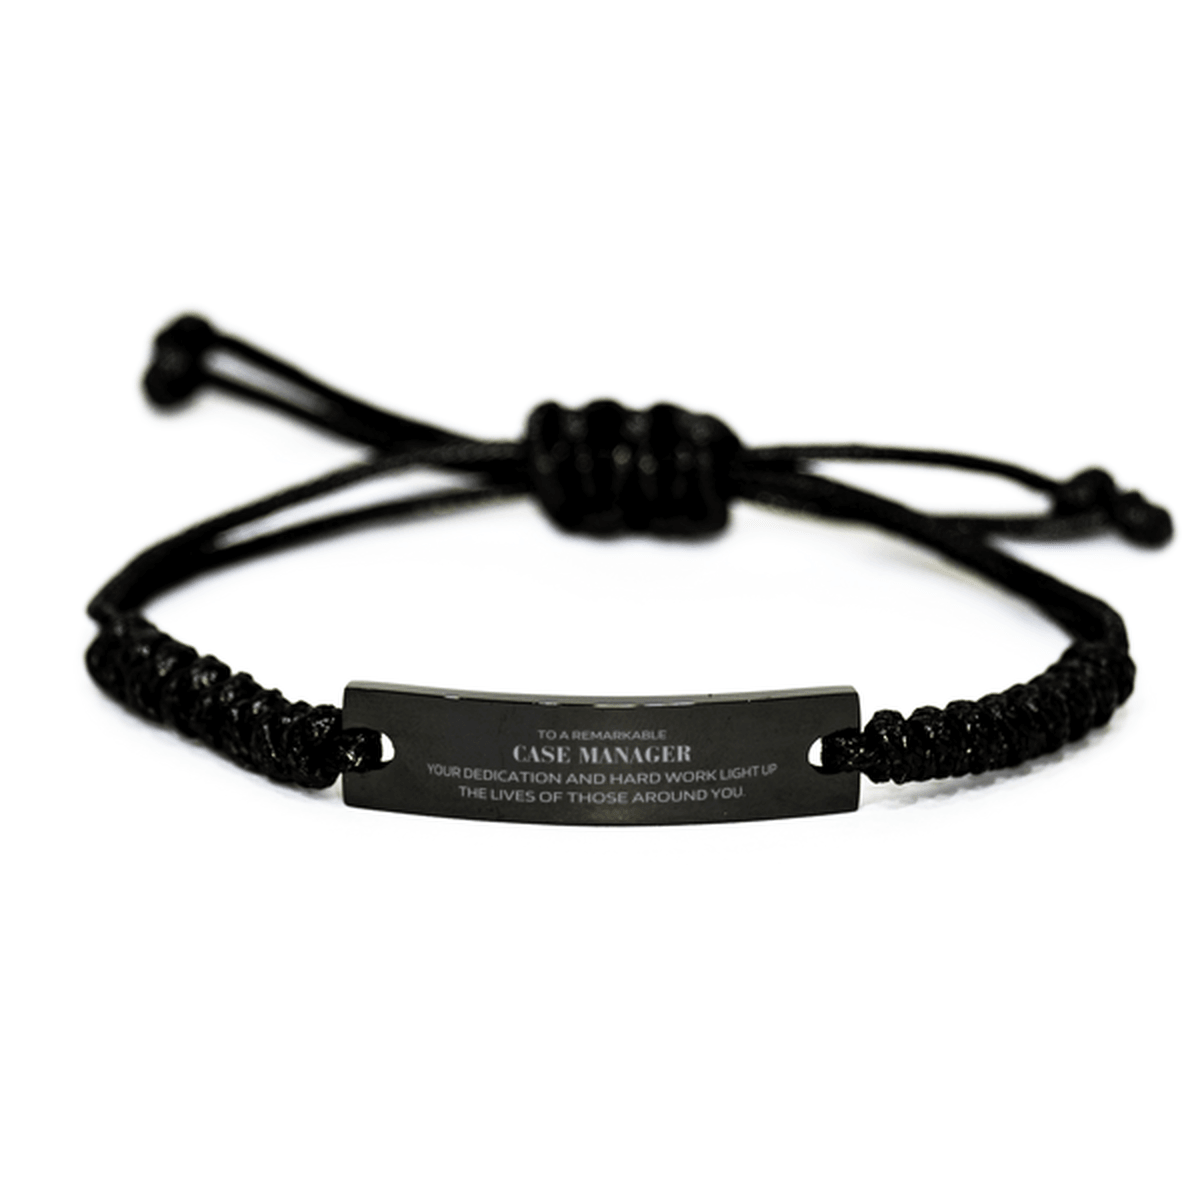 Remarkable Case Manager Gifts, Your dedication and hard work, Inspirational Birthday Christmas Unique Black Rope Bracelet For Case Manager, Coworkers, Men, Women, Friends - Mallard Moon Gift Shop